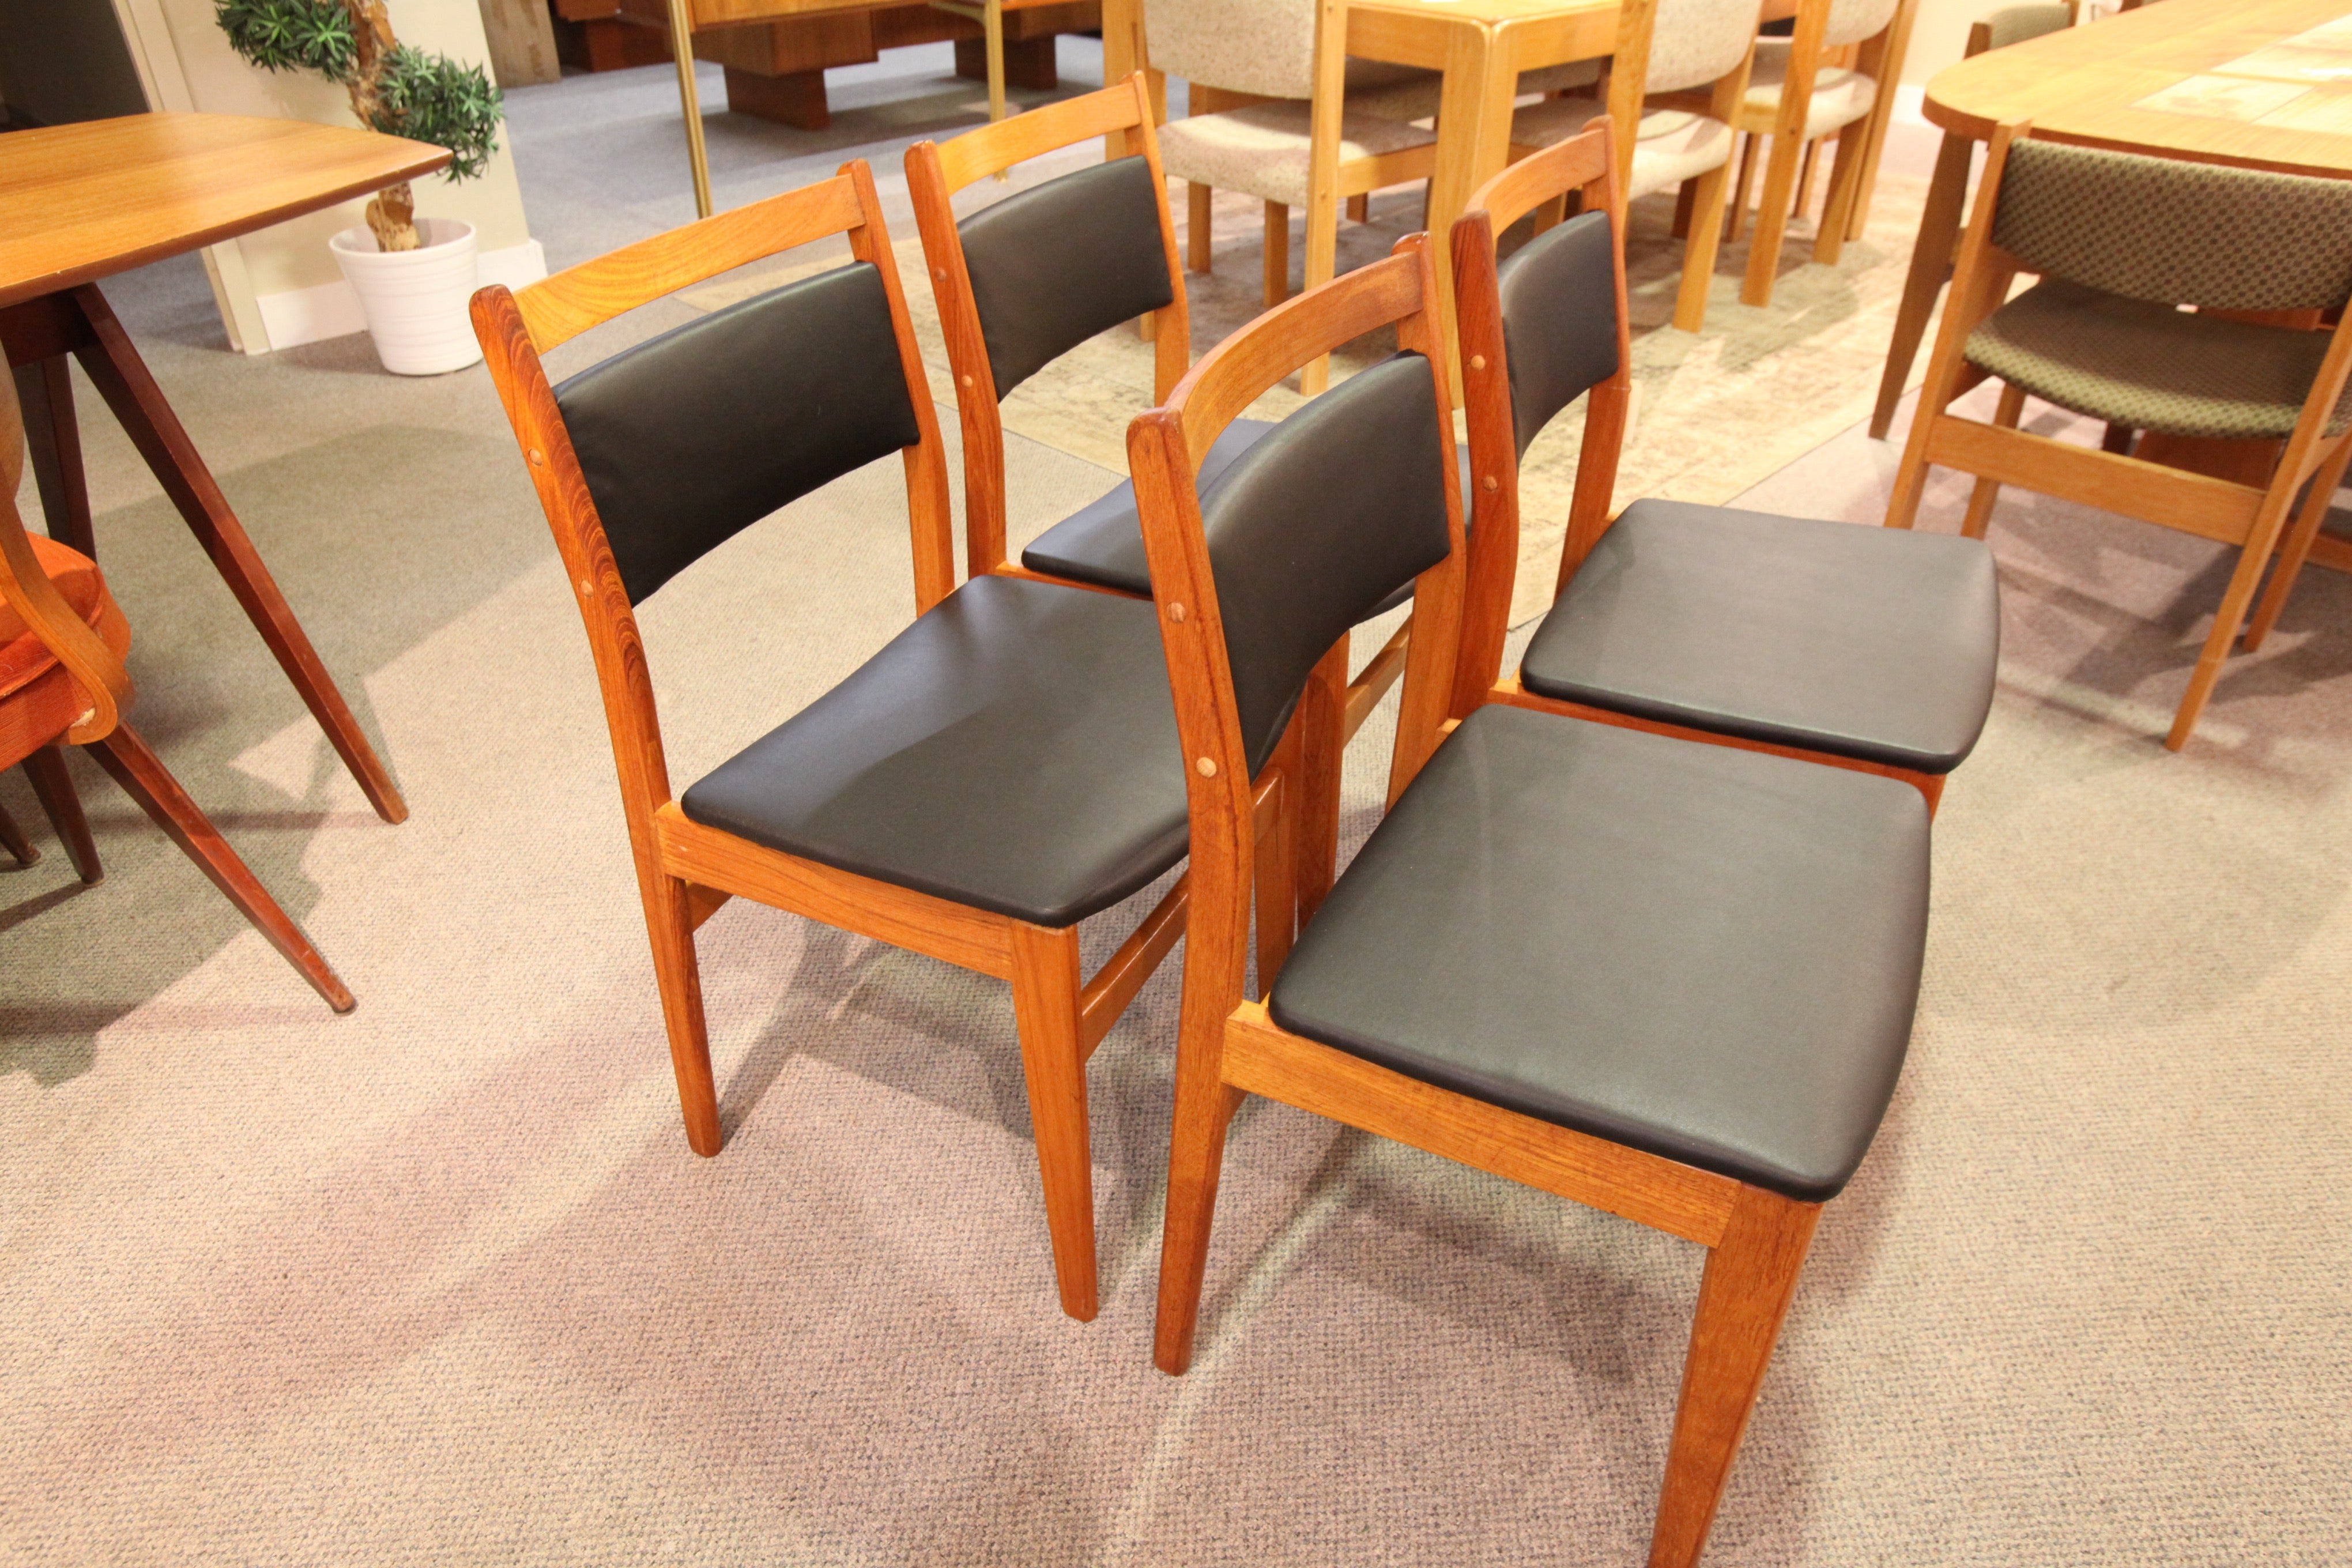 Set of 4 Teak Chairs (Recently Recovered)